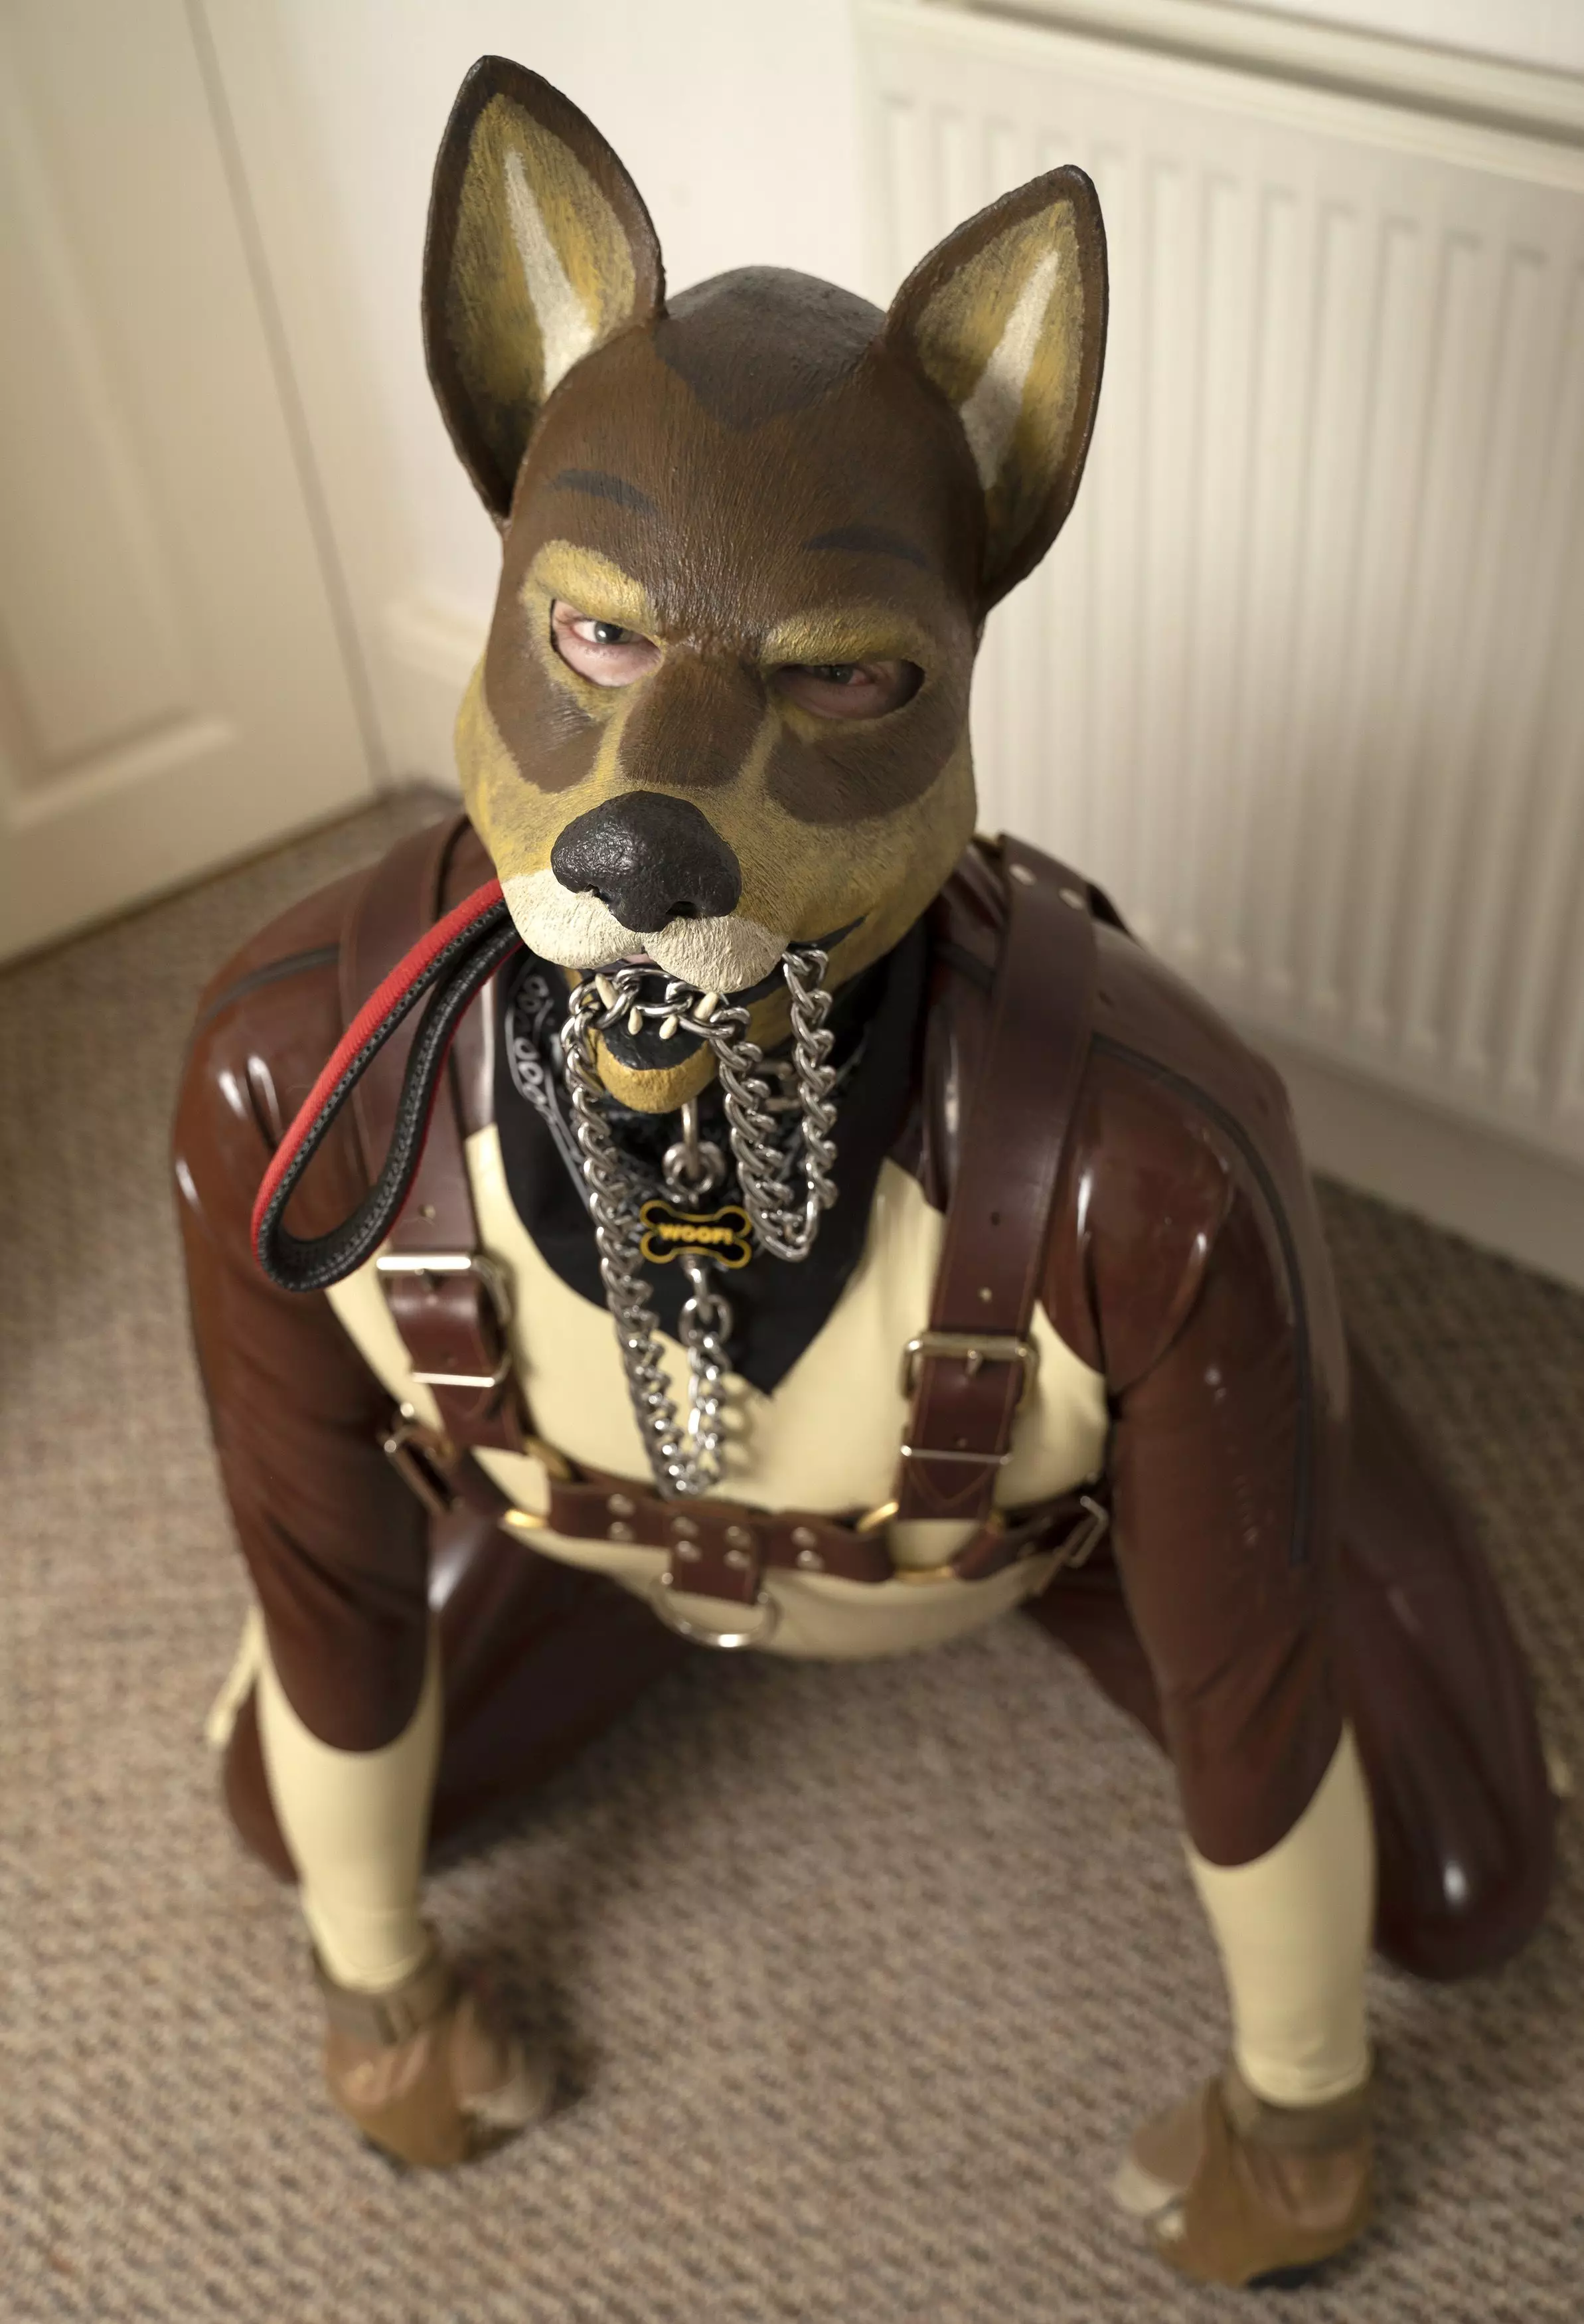 On all fours with his lead in his mouth.